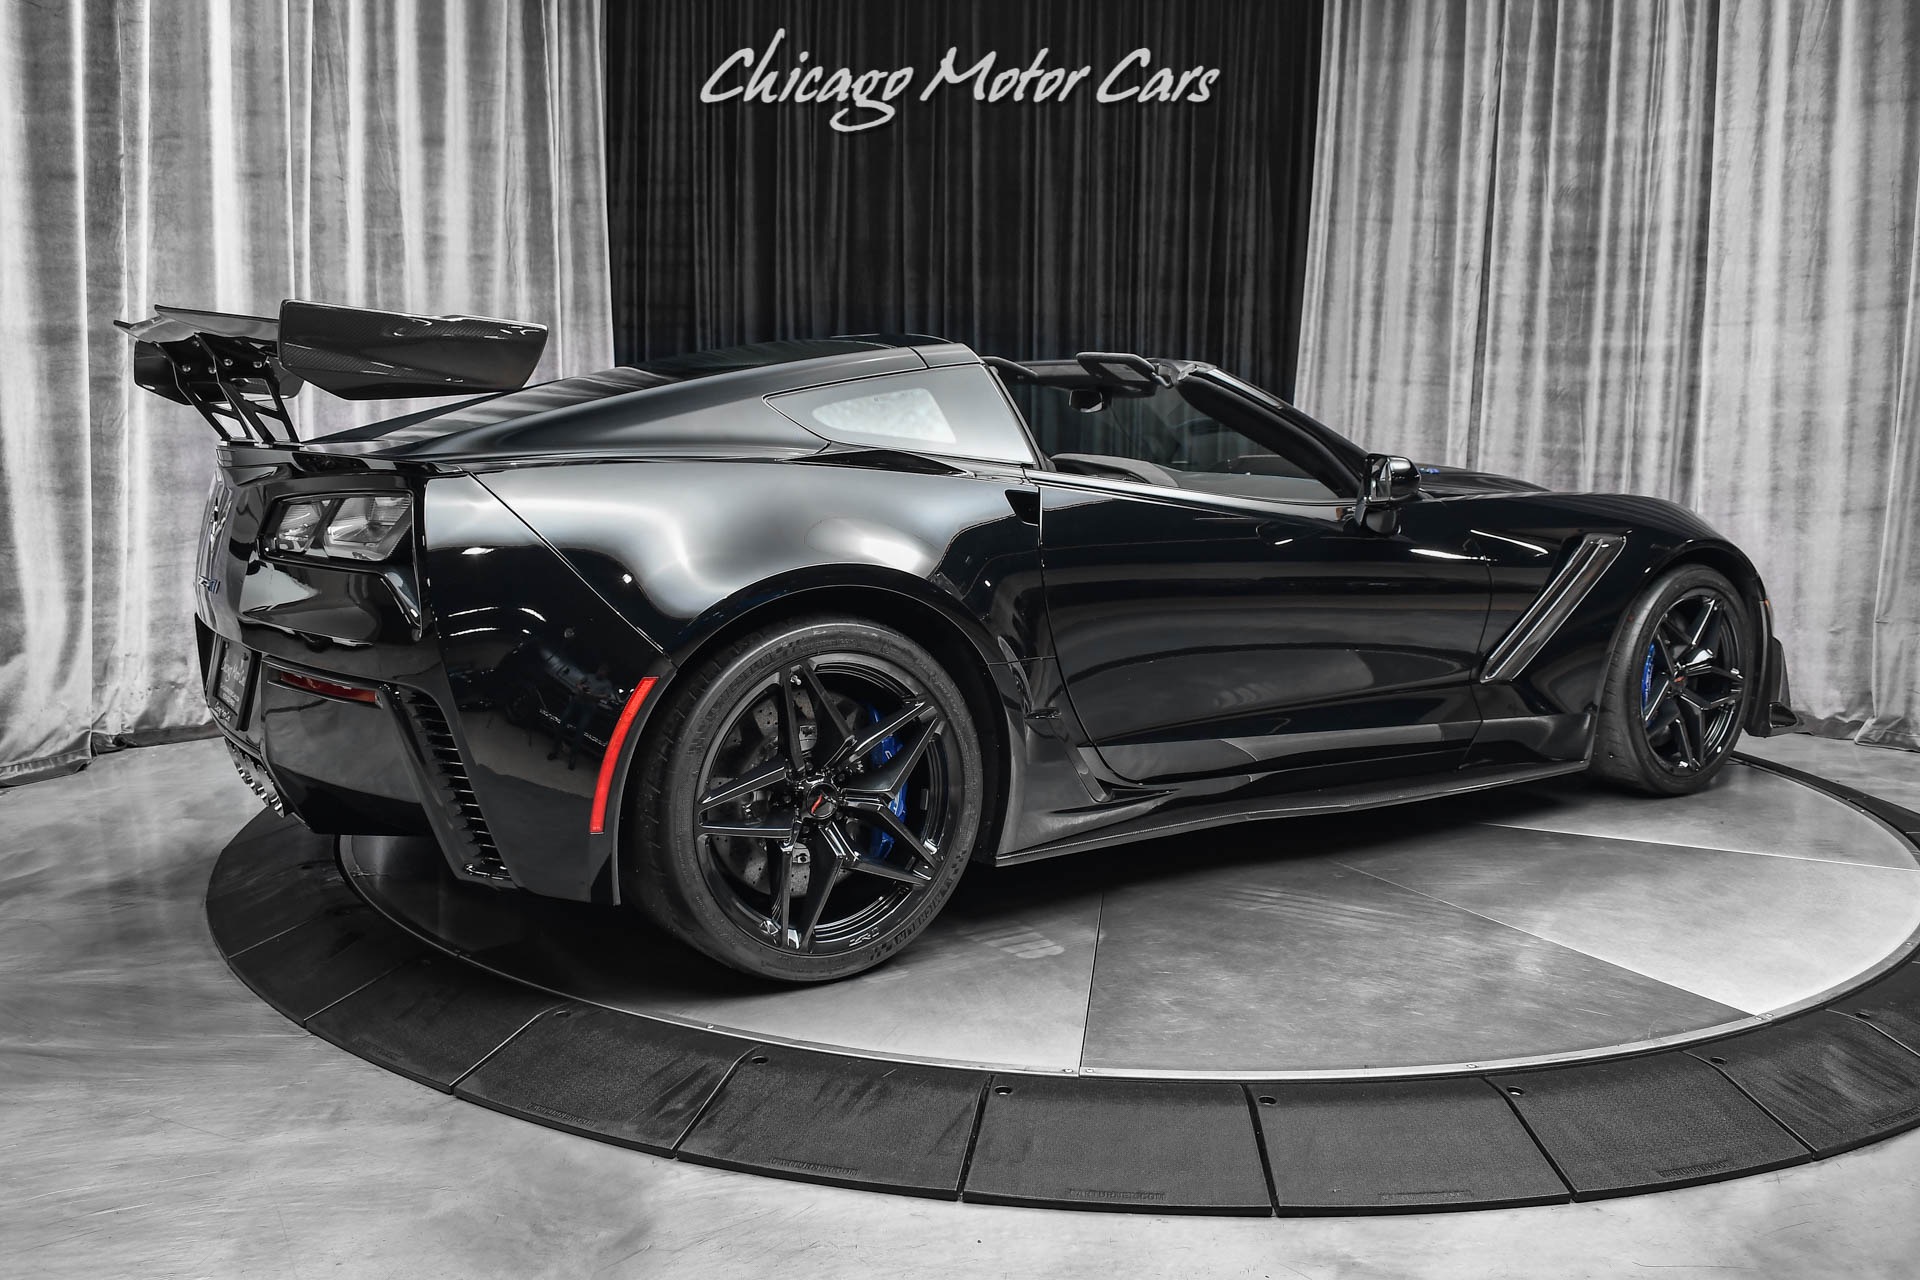 Used-2019-Chevrolet-Corvette-ZR1-3ZR-ZTK-Package-7-Speed-Manual-Extremely-Low-Miles-Rare-Example